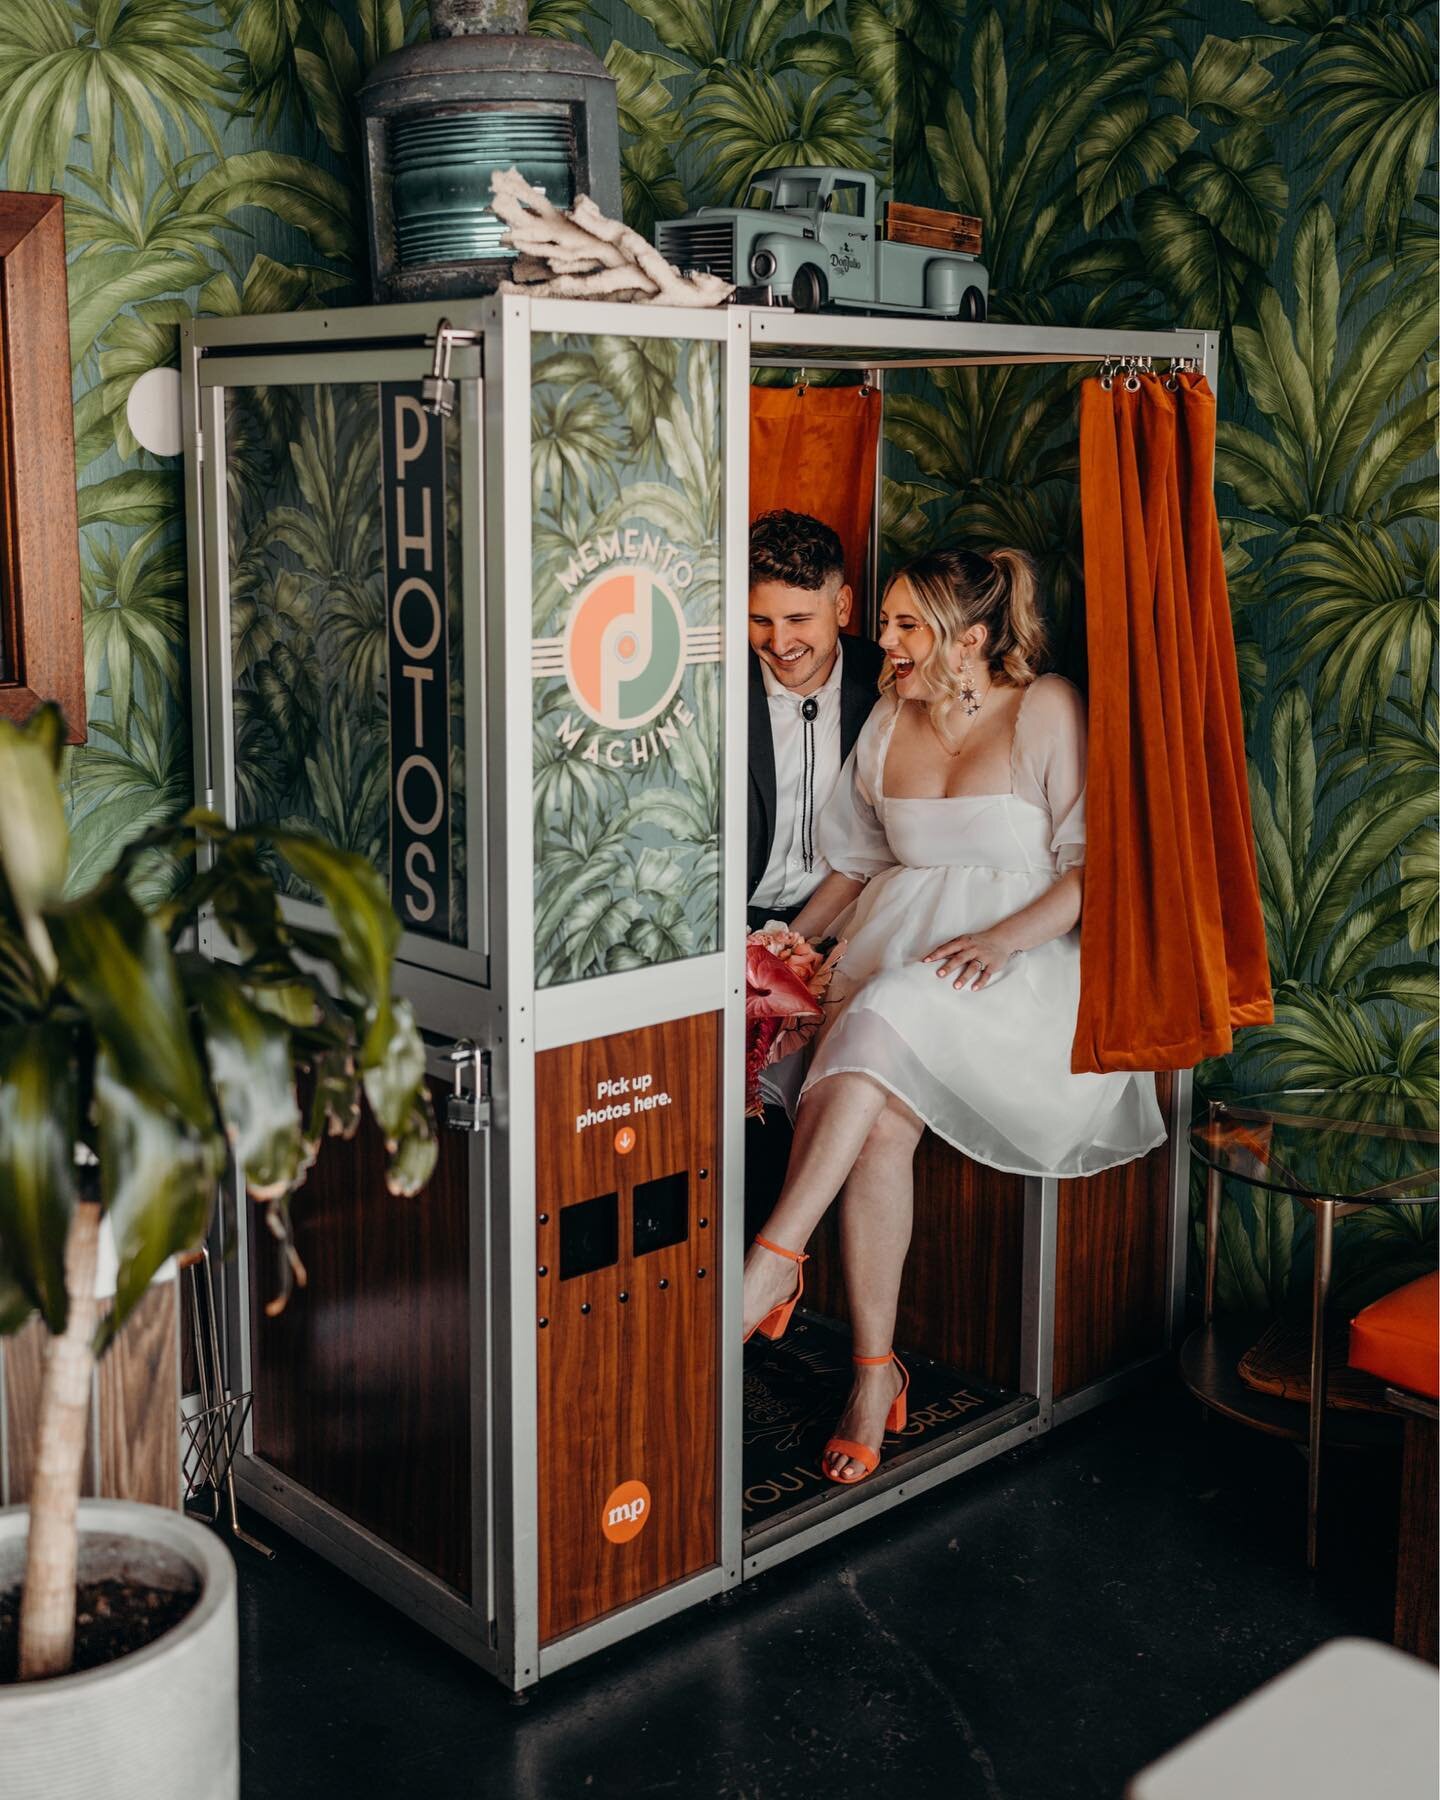 I&rsquo;ll take funky elopement photos until the day I die. And even then I hope heaven is full of funky colors and frozen cocktails 🍹😏